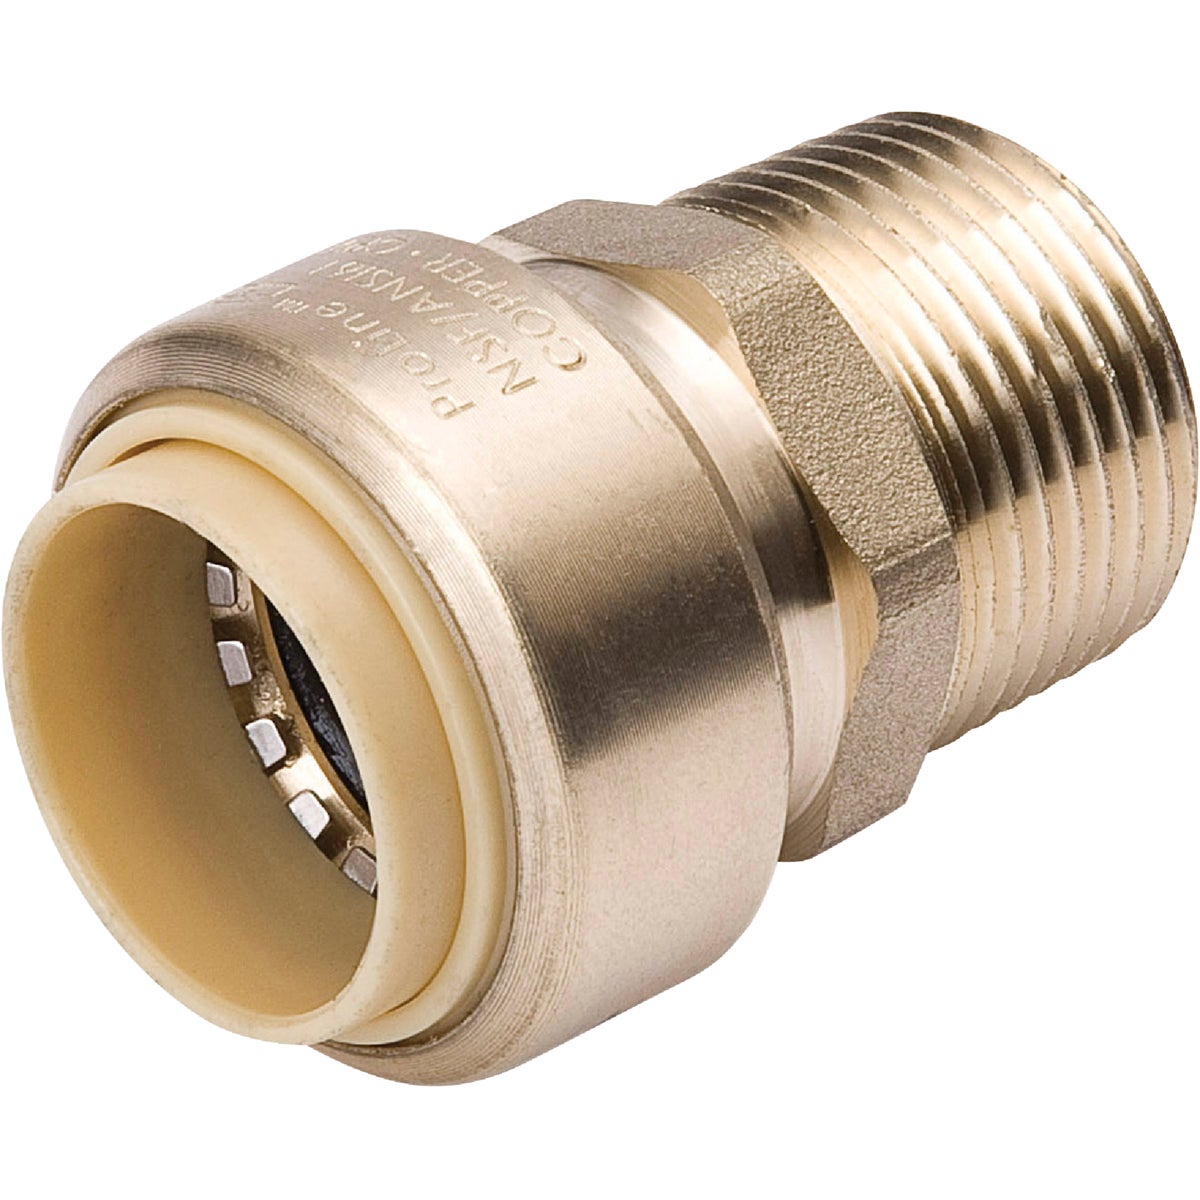 ProLine 1/2 In. x 1/2 In. MPT Brass Push Fit Adapter